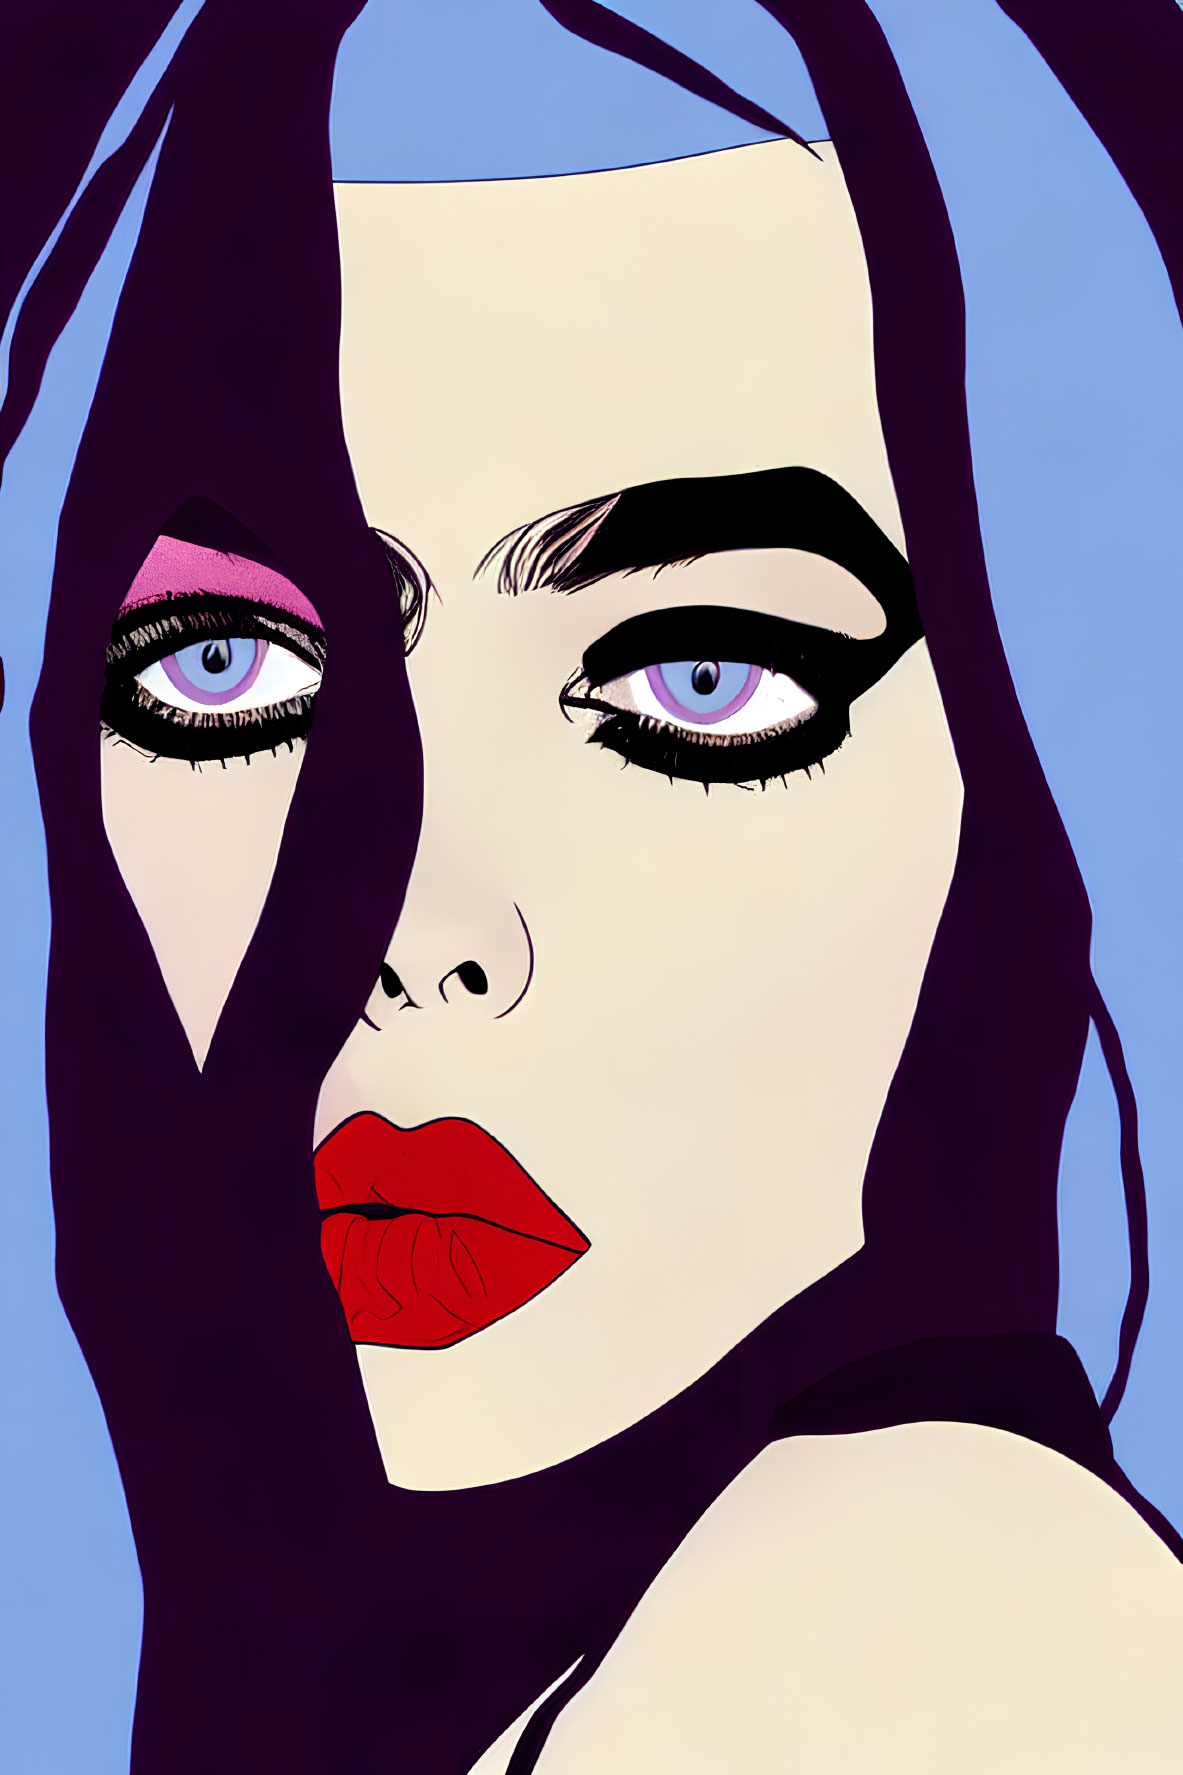 Stylized portrait of a person with dramatic makeup and intense blue eyes